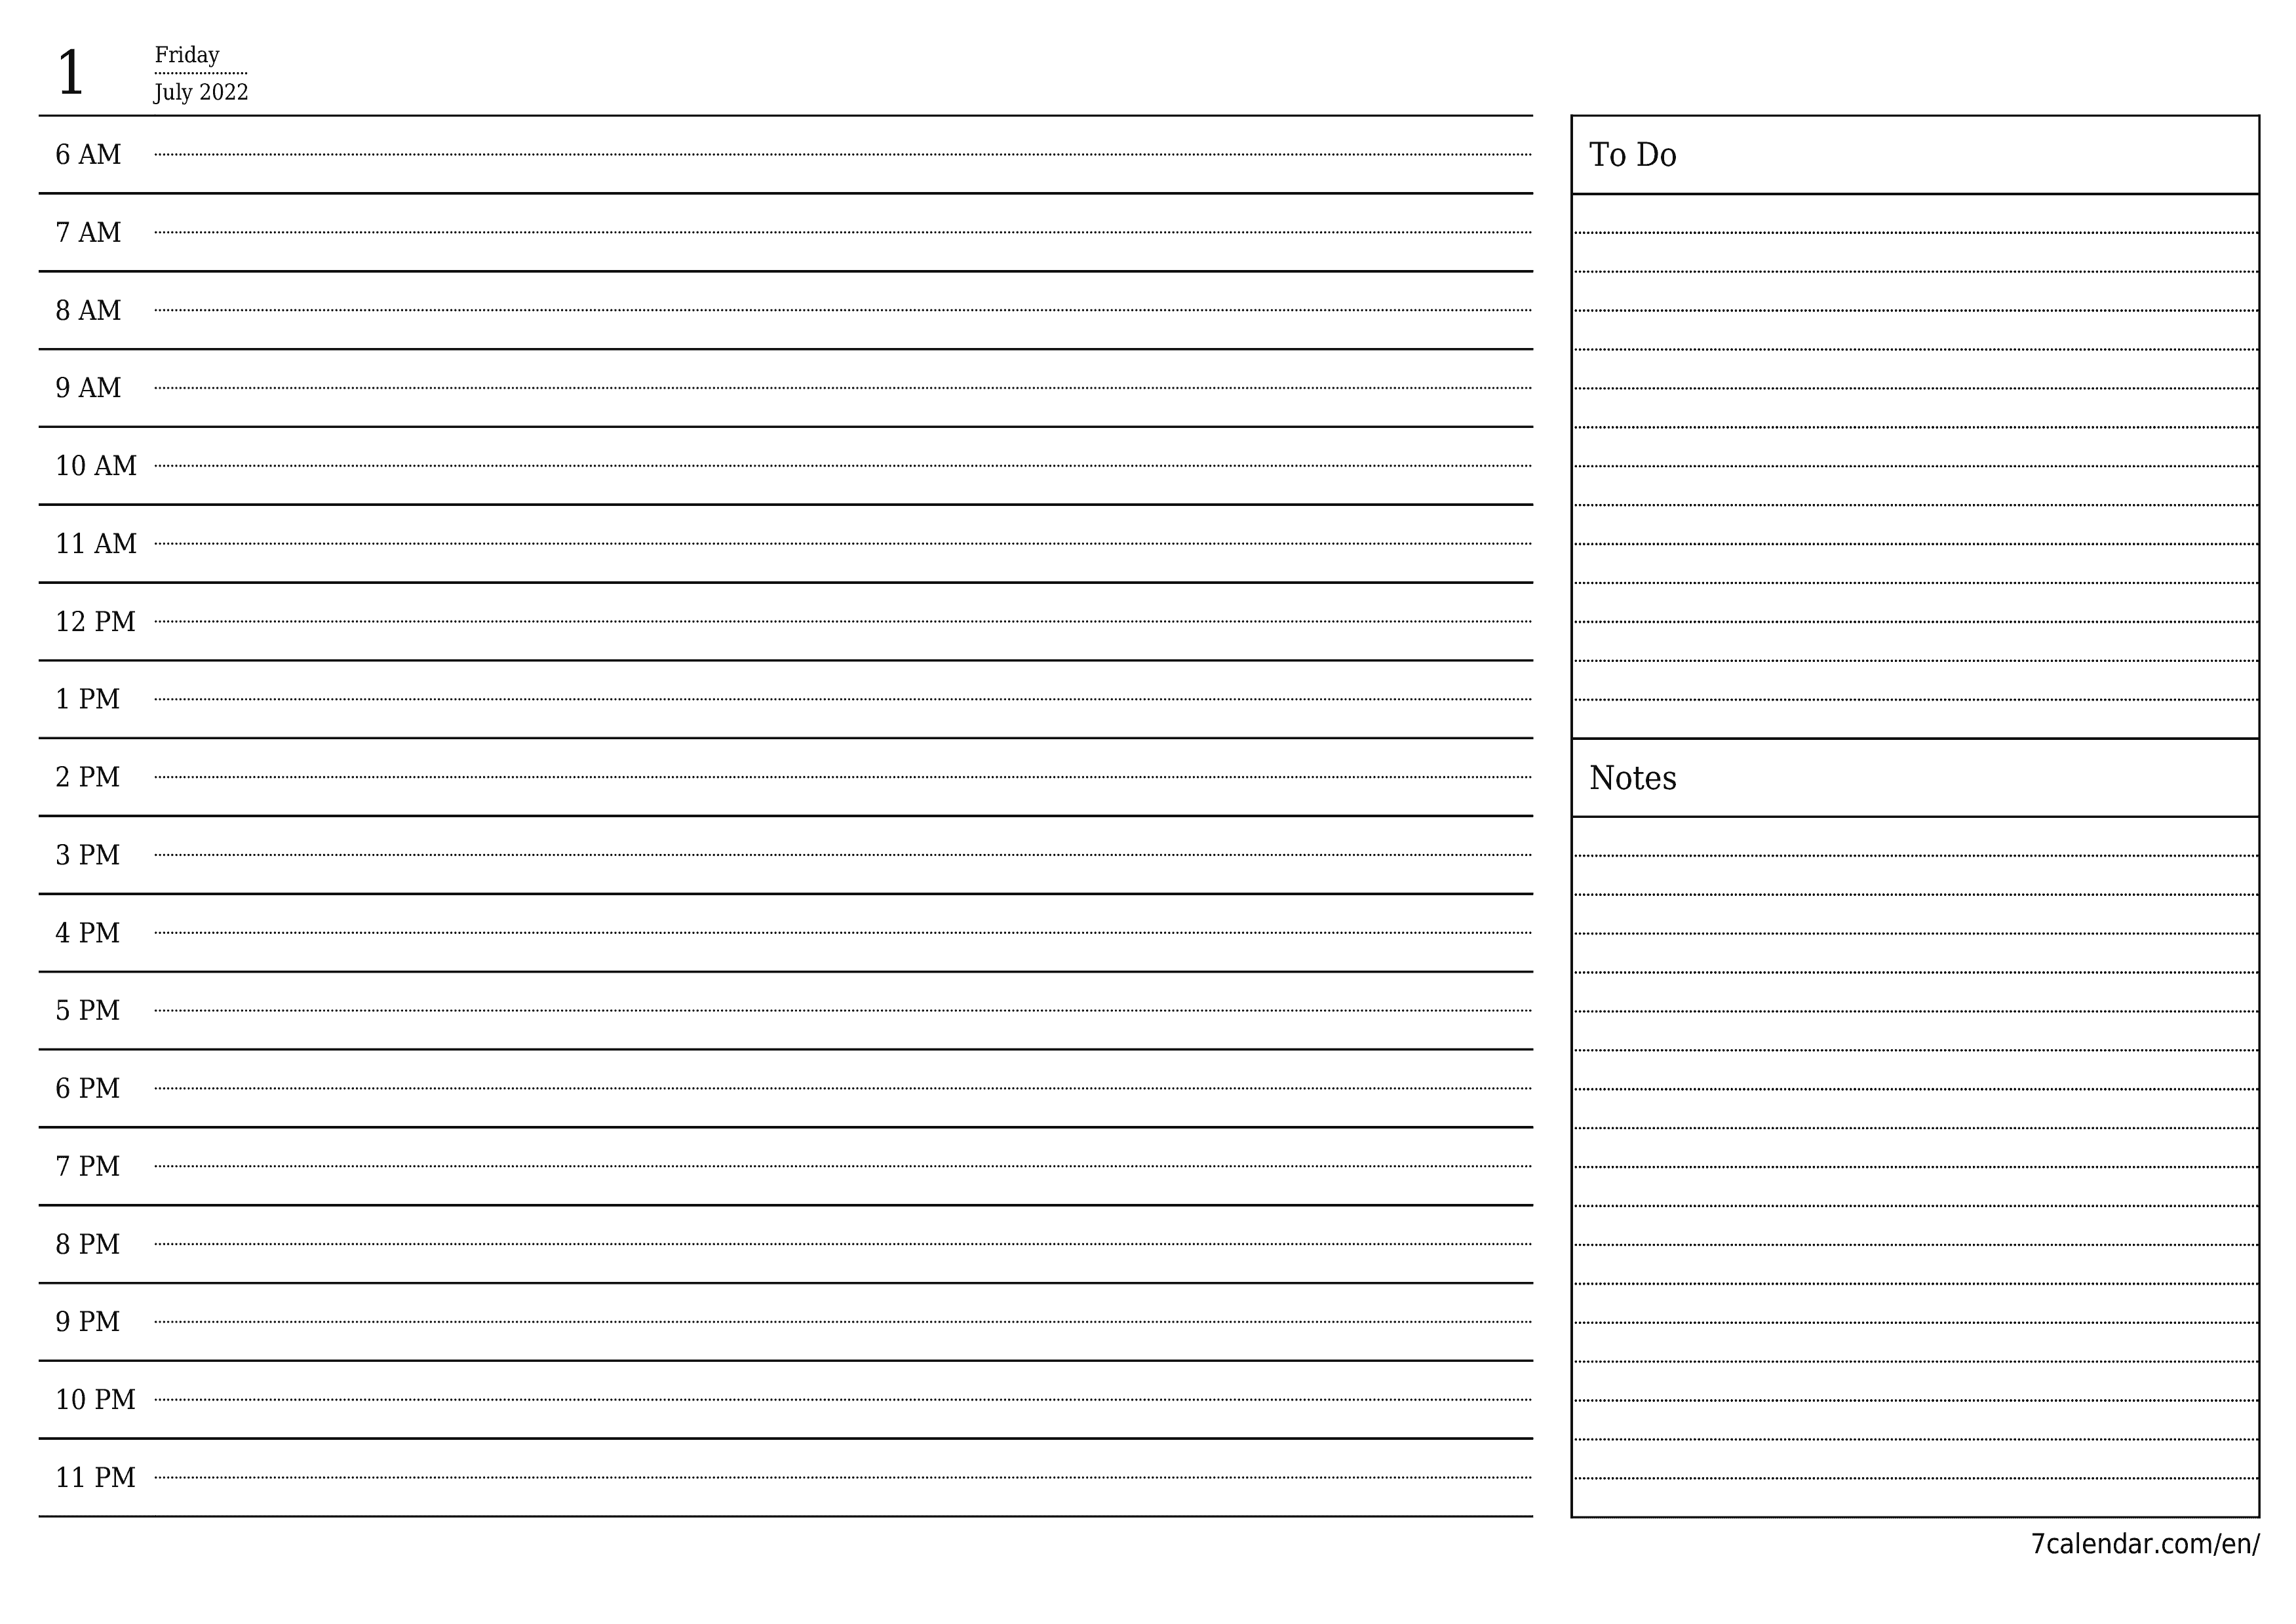 Blank daily printable calendar and planner for day July 2022 with notes, save and print to PDF PNG English - 7calendar.com